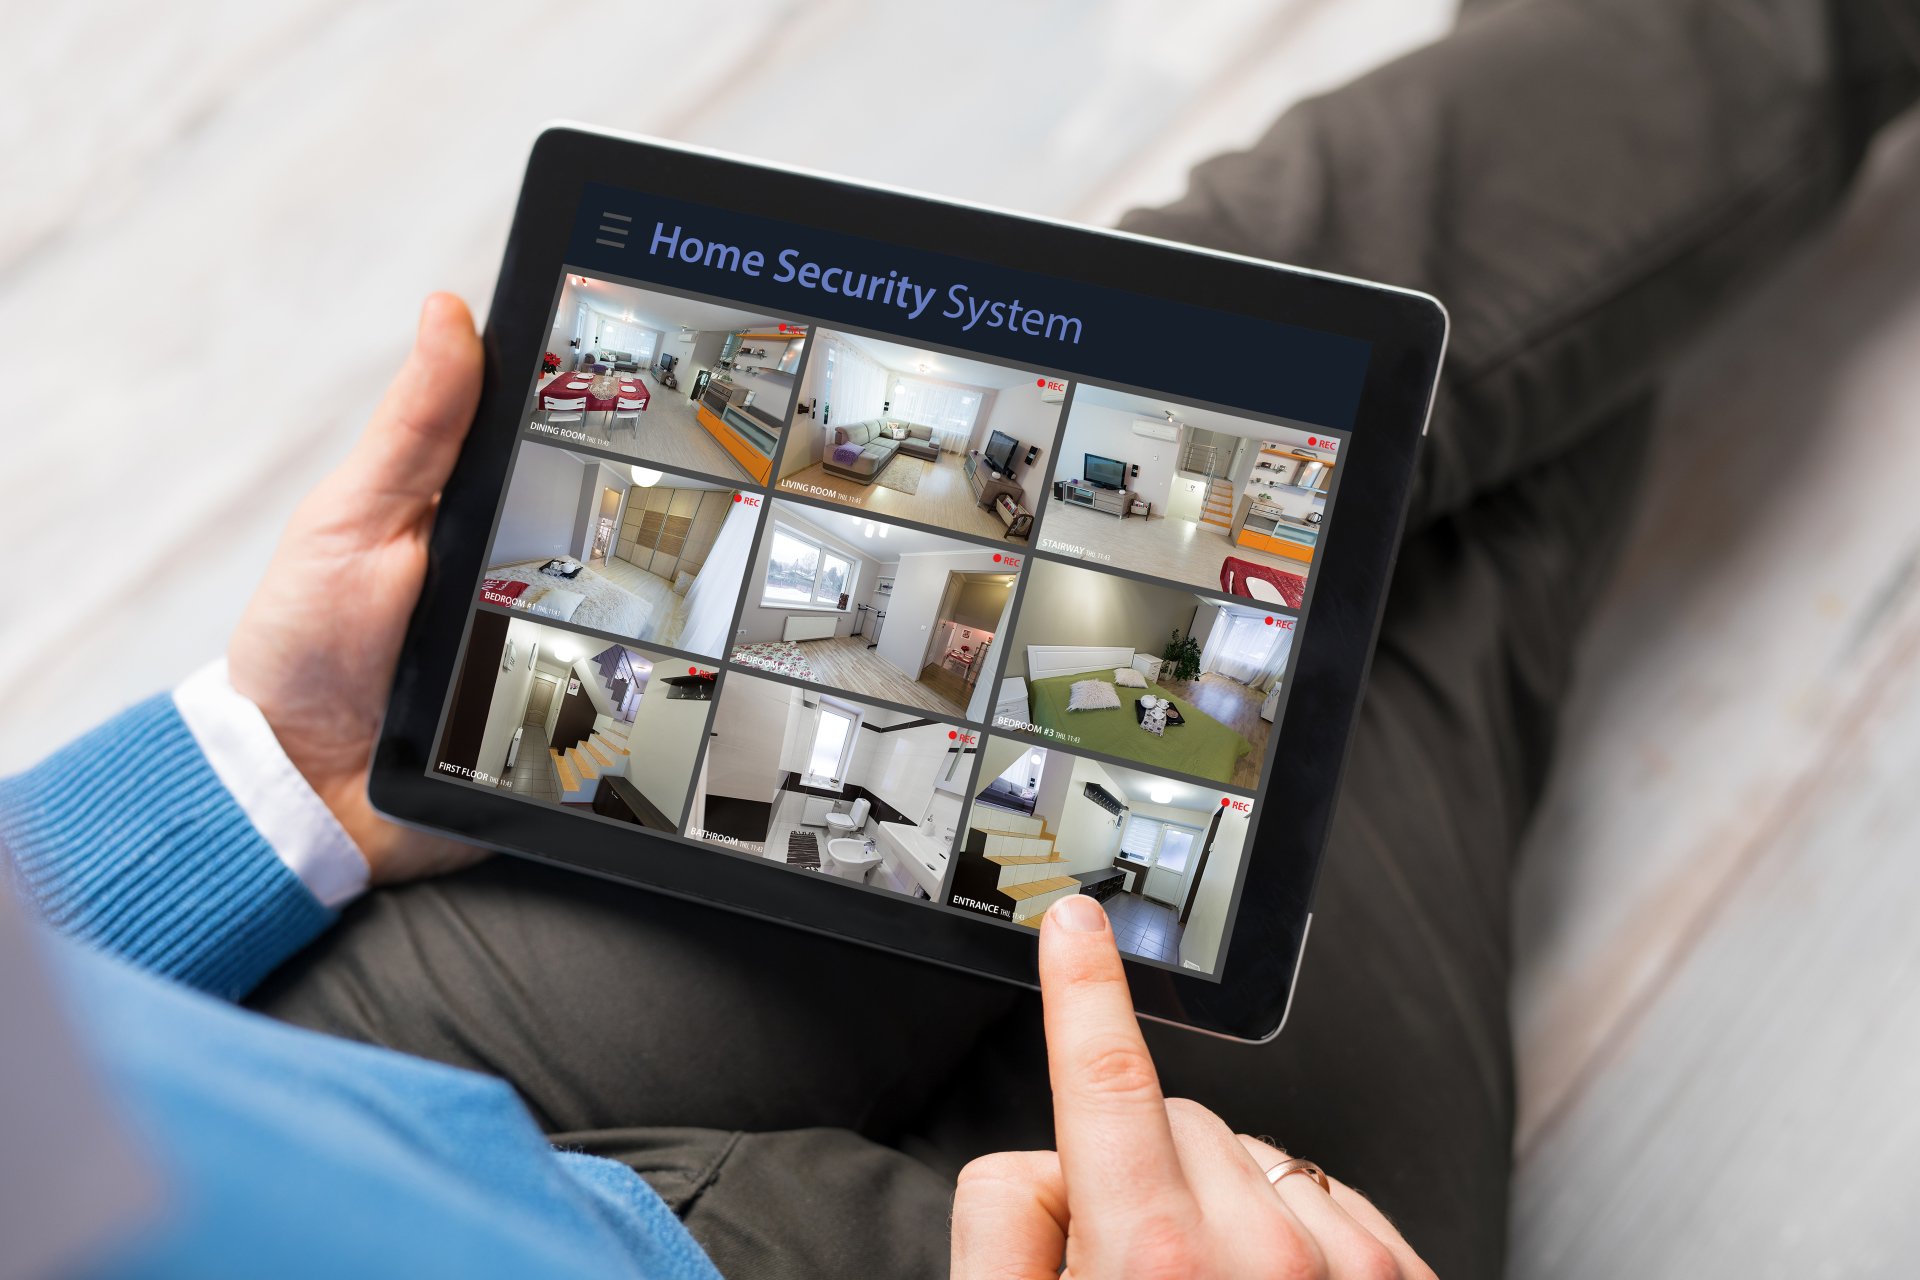 The systems of DBS Security Solutions Ltd. can be found throughout Southern Ontario and the Greater Toronto Area.